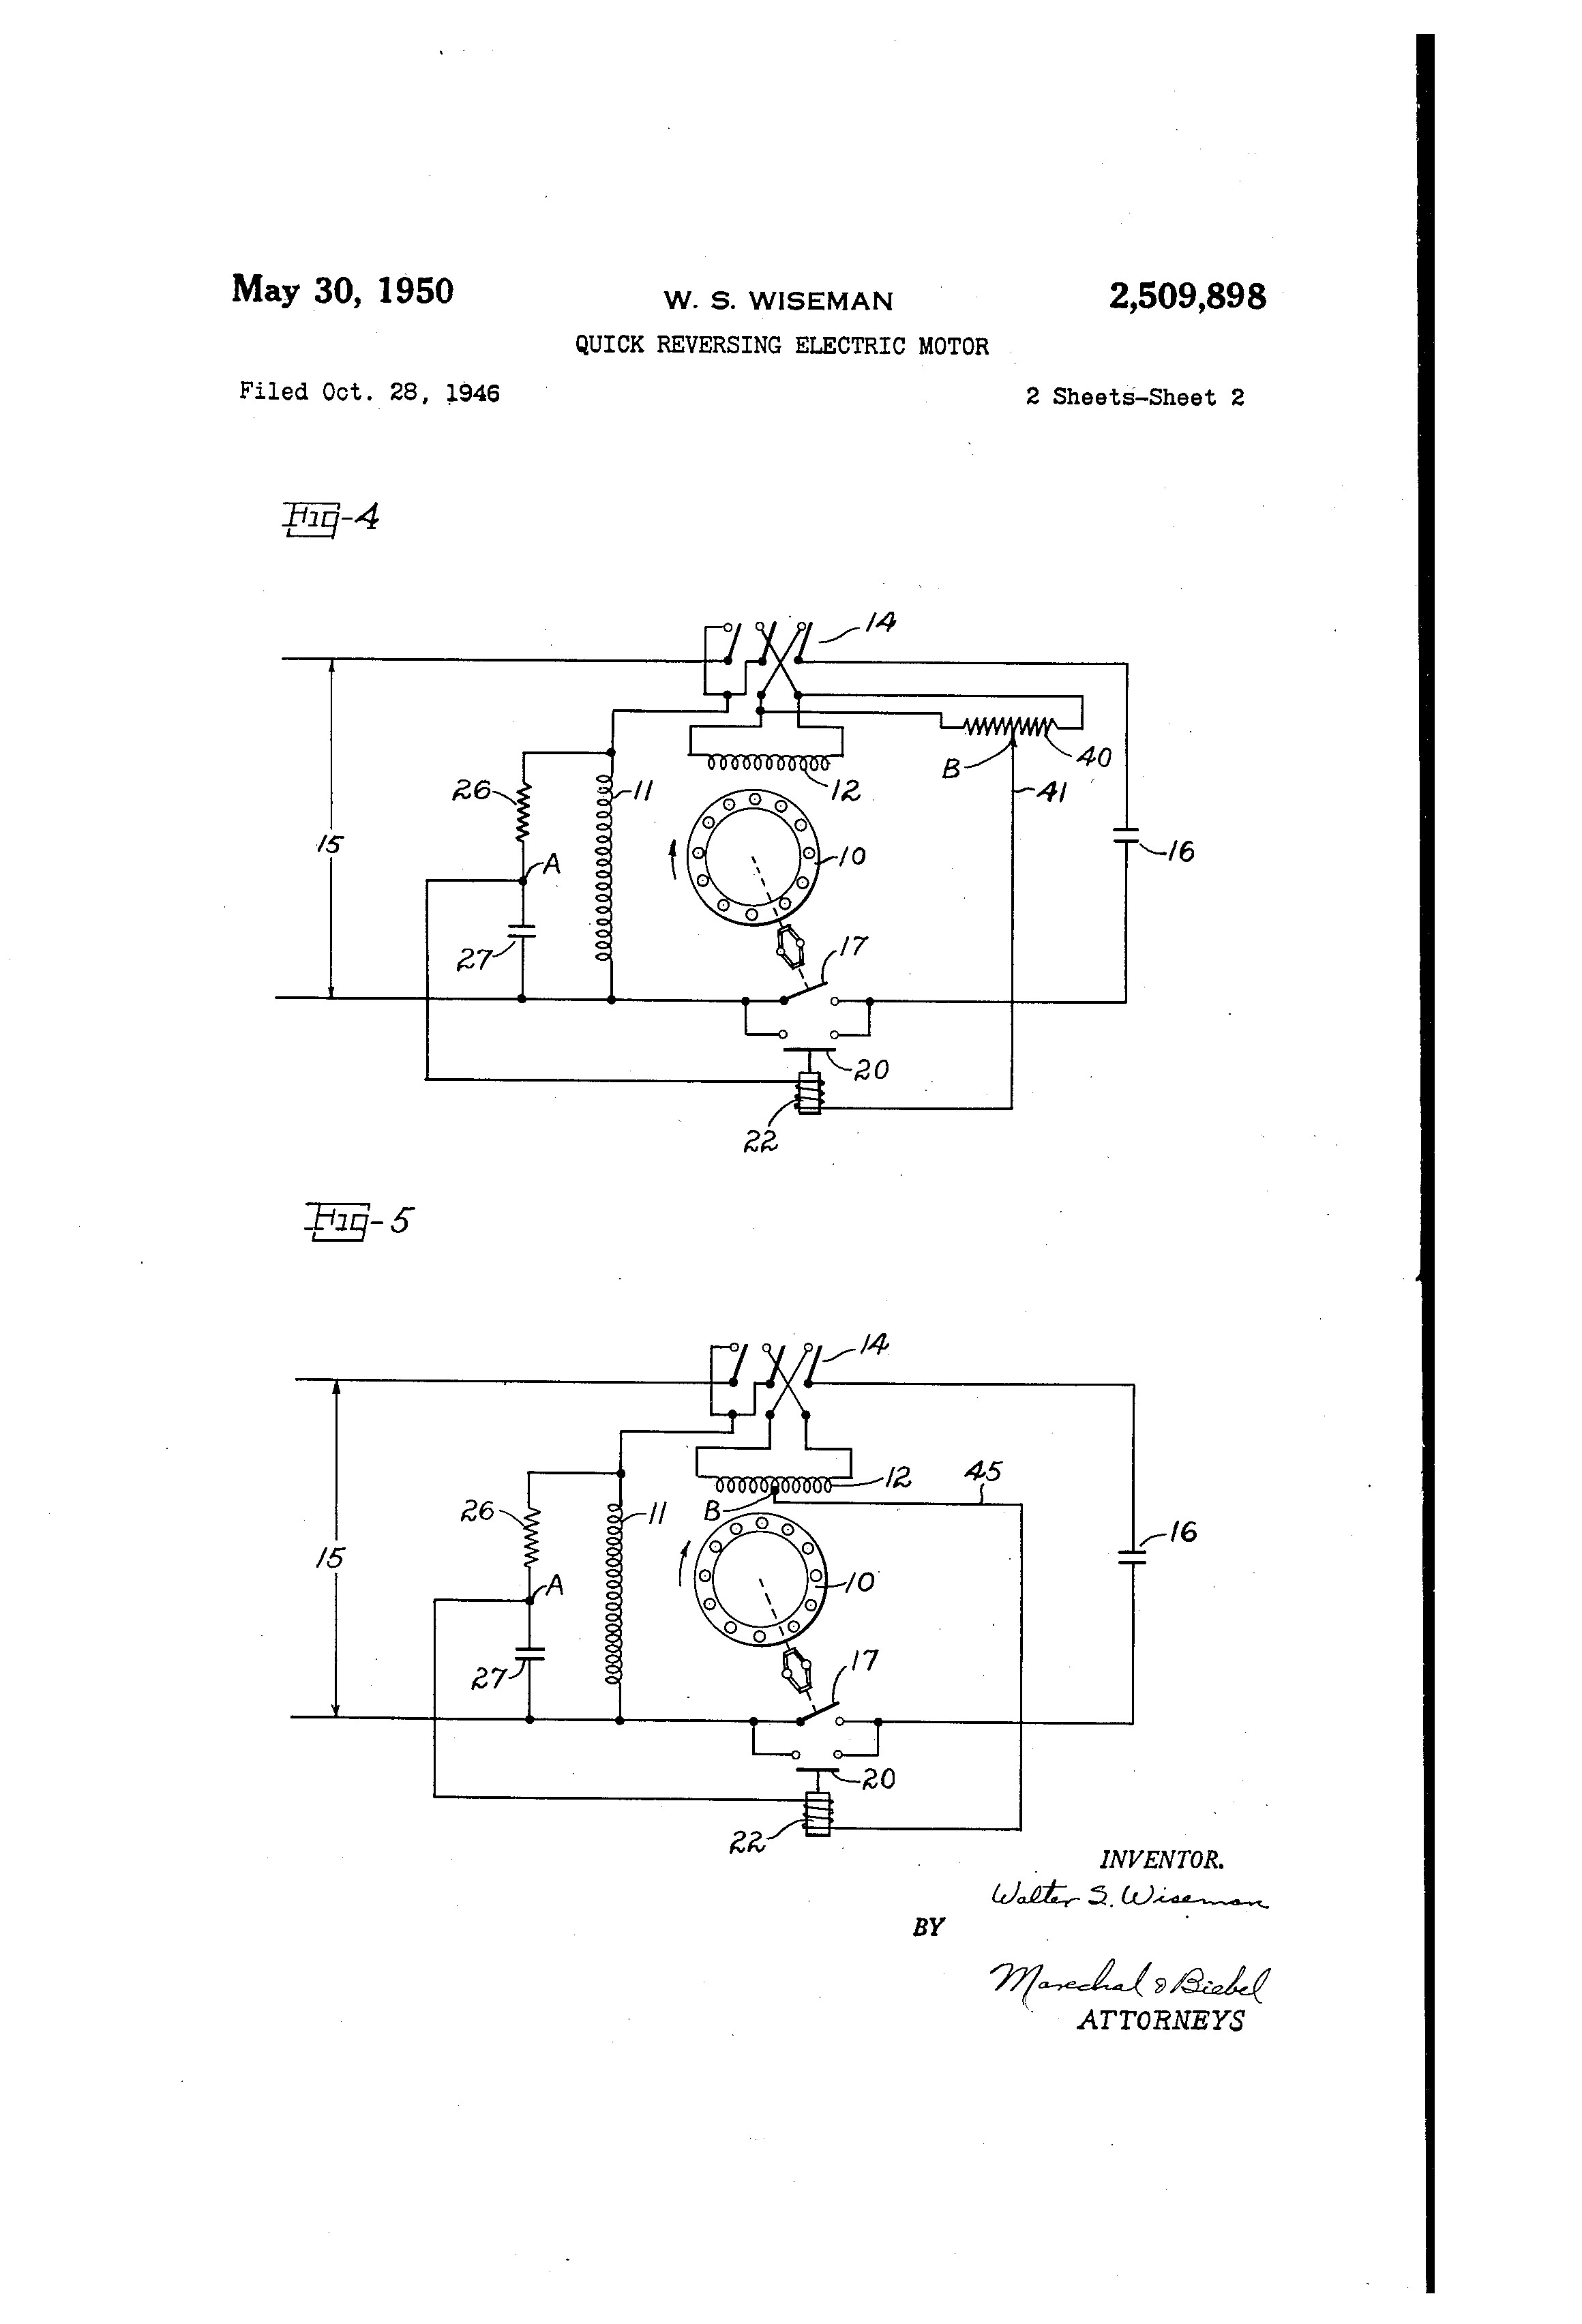 wagner electric motor wiring diagram Download Wiring Diagram for Single Phase Motor Luxury Patent Us